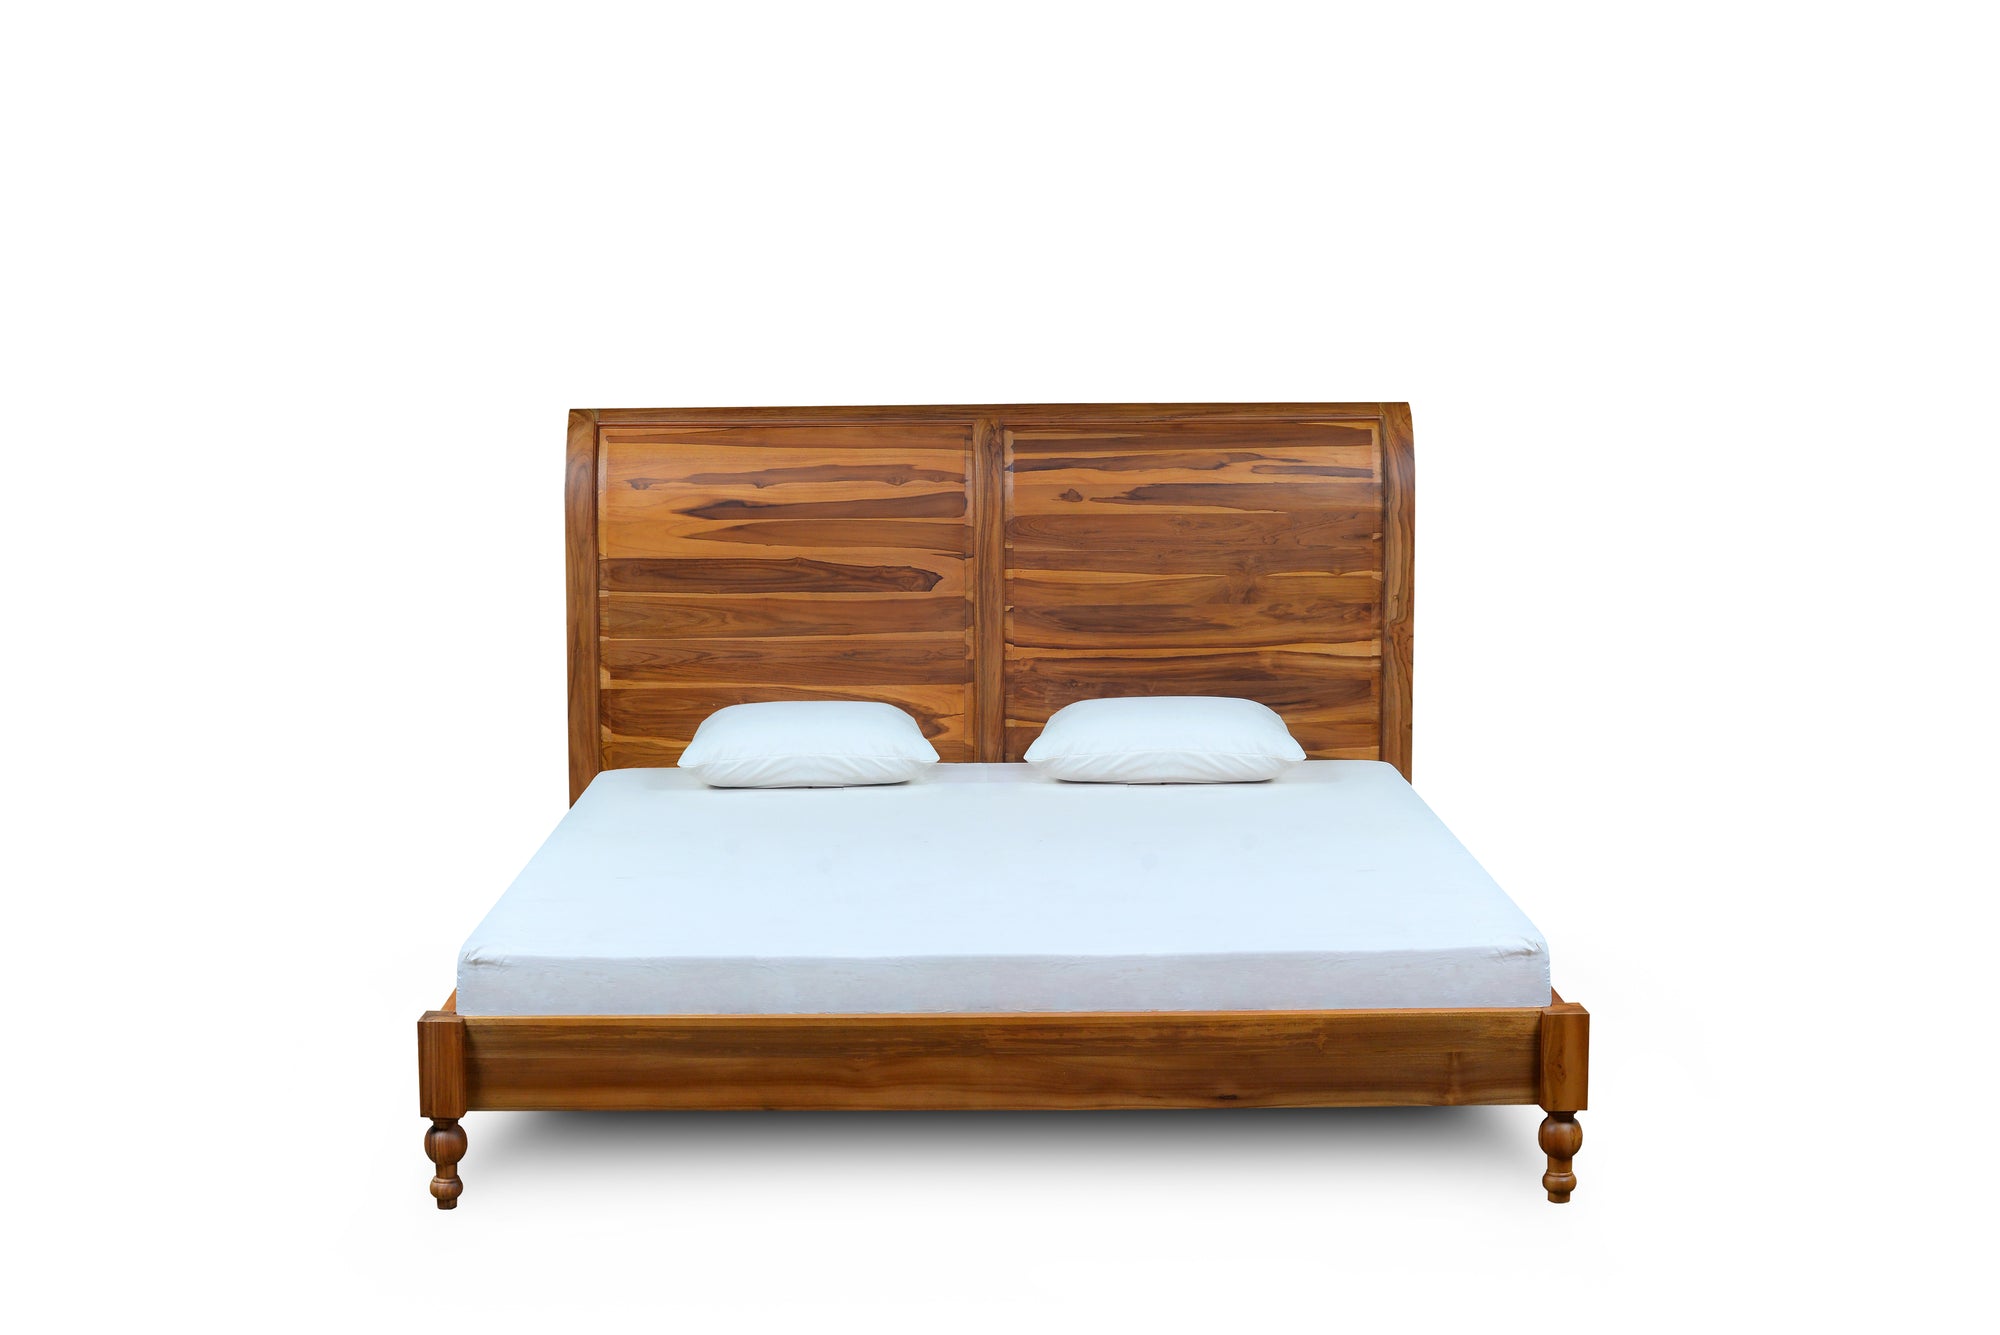 Sleigh King Teak Bed Candy Brown Finish